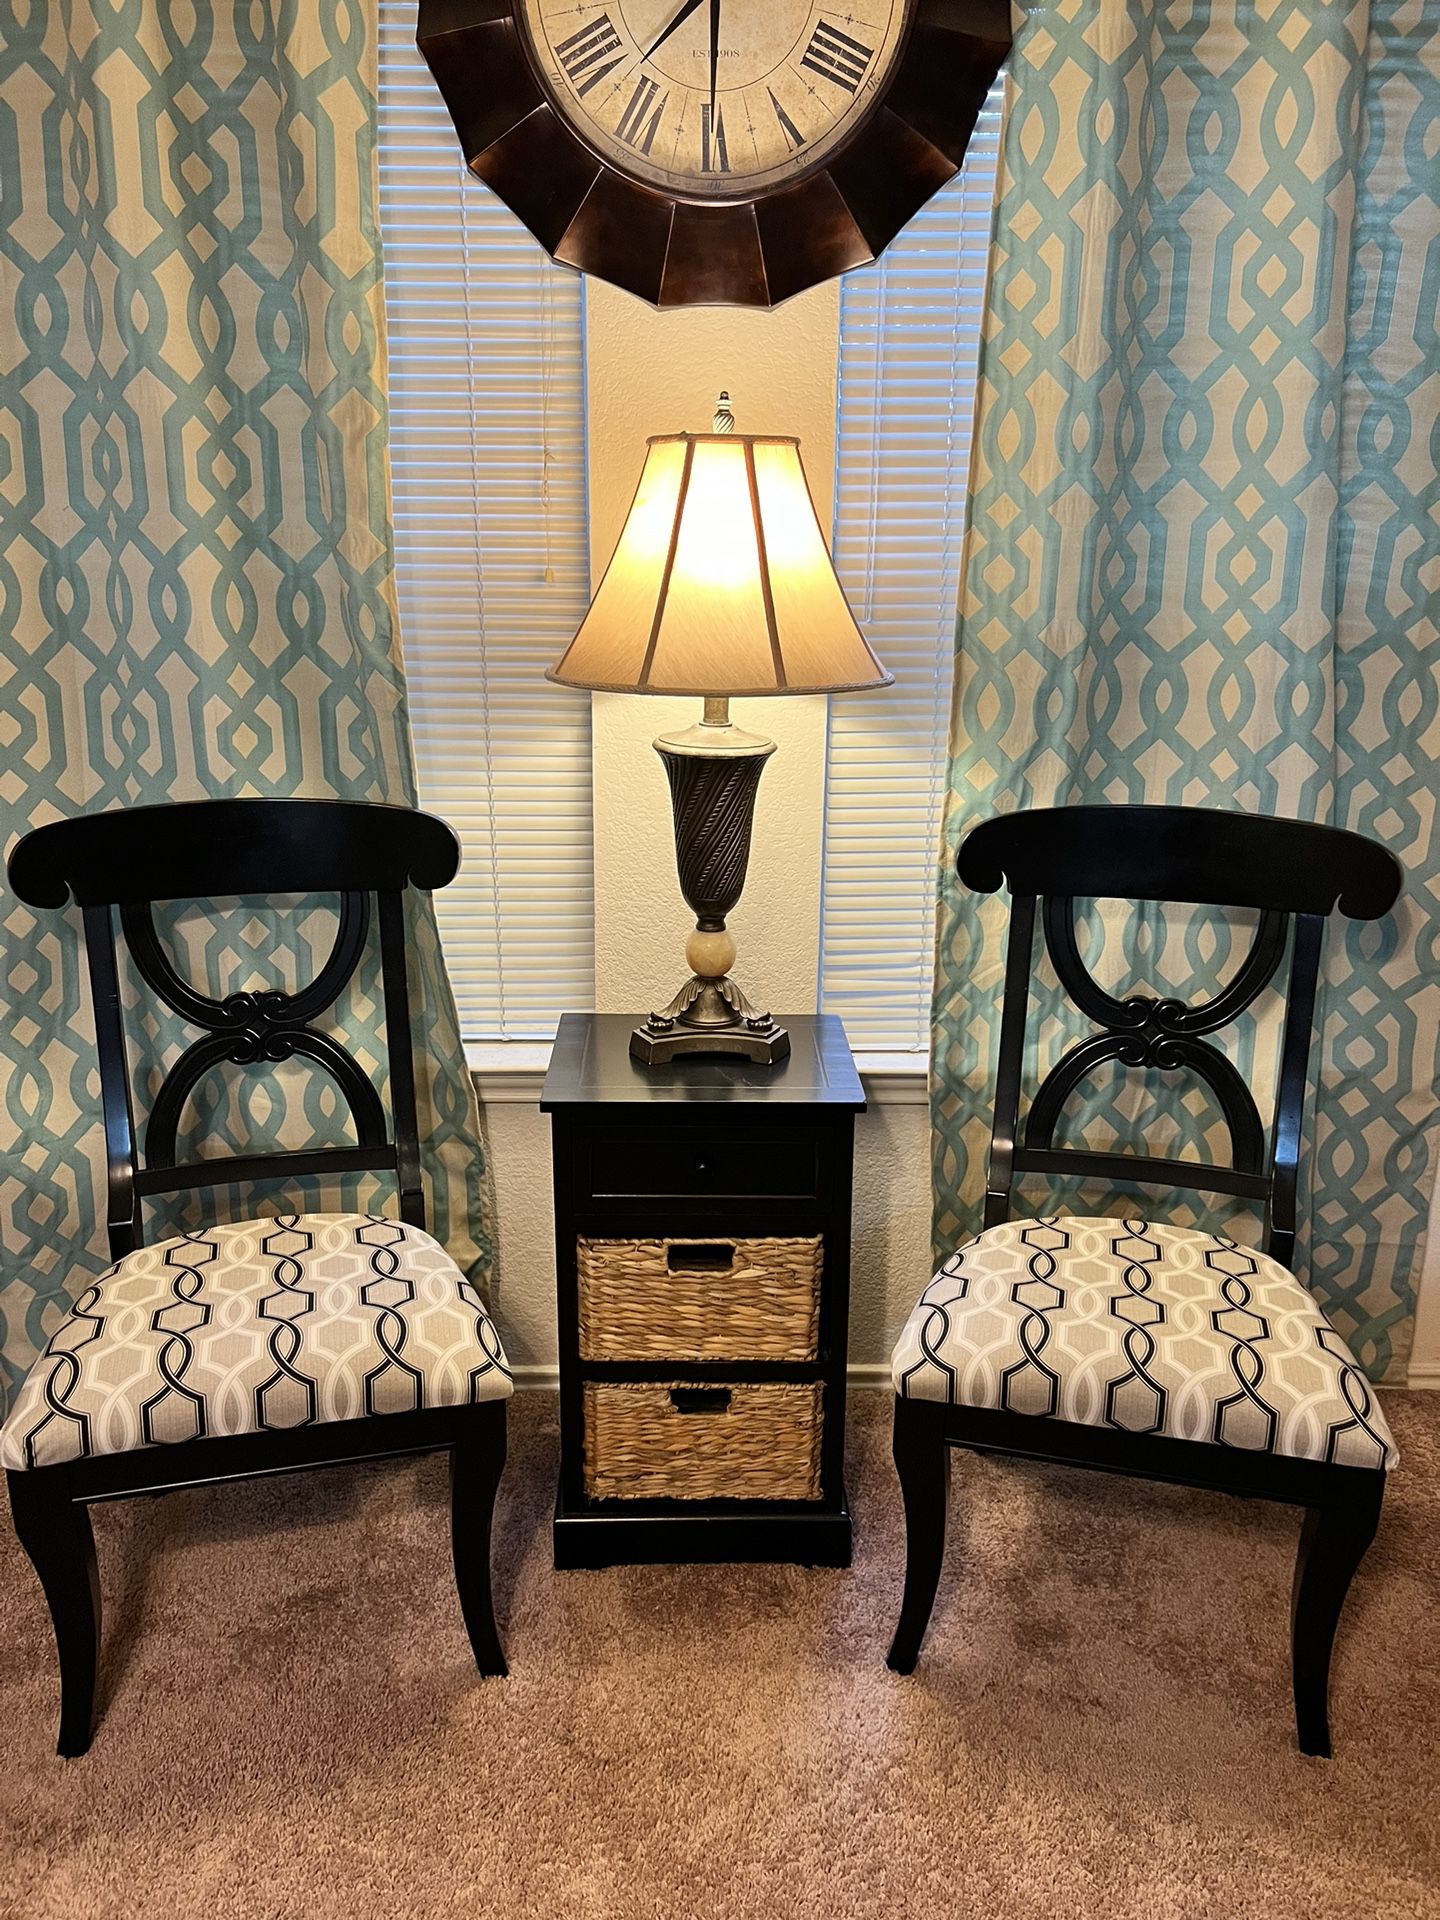 Accent Chairs & Table